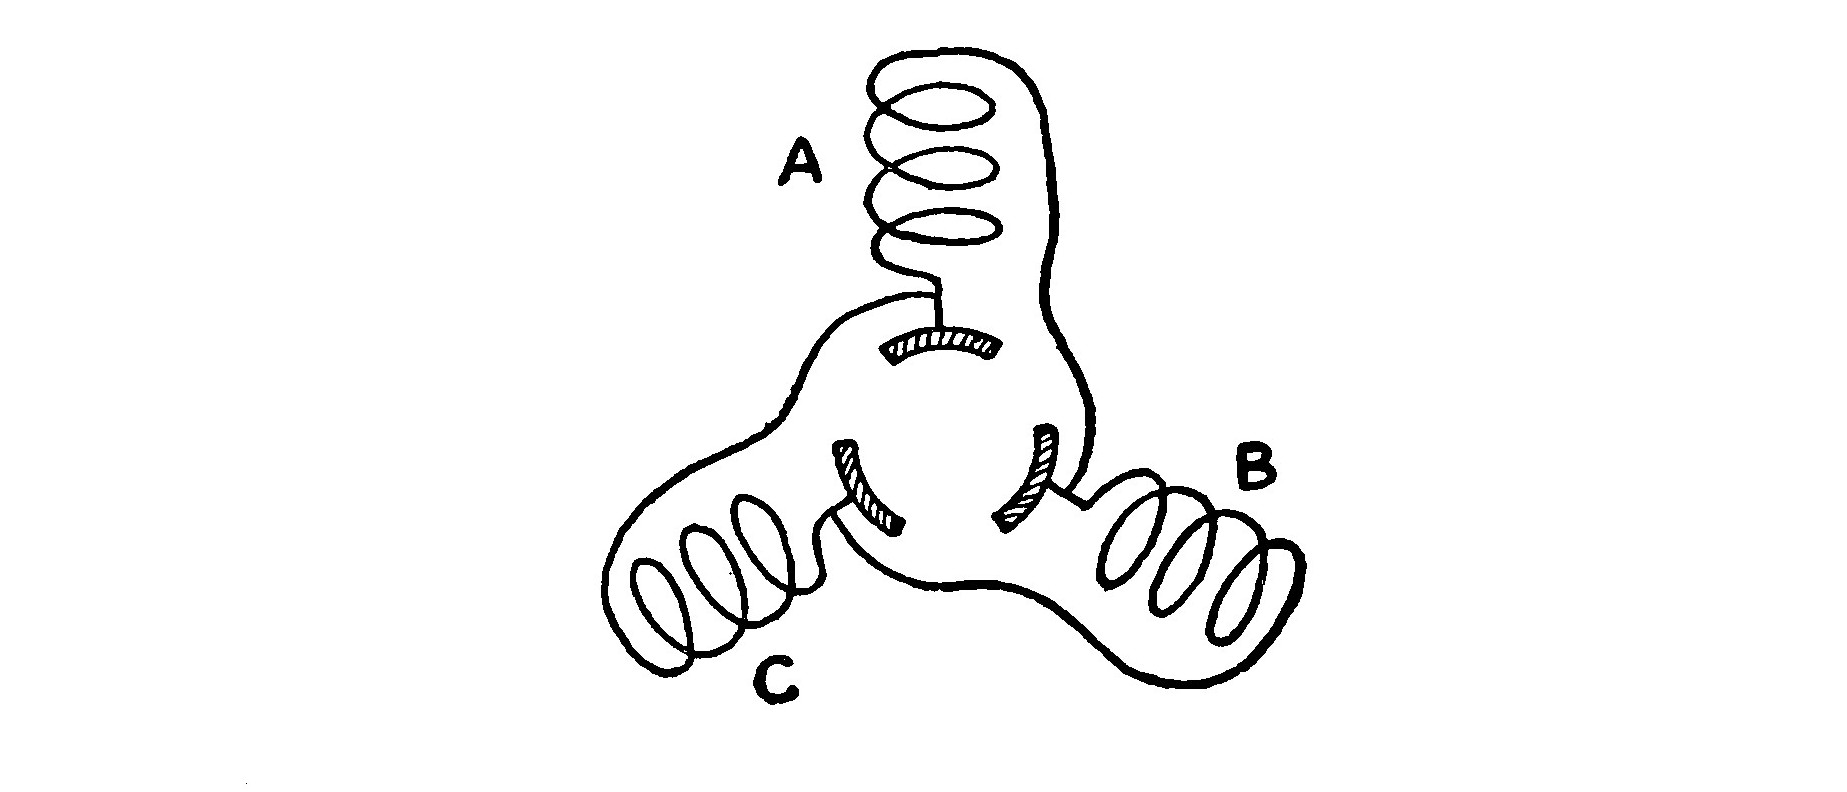 FIG. 23.—Diagram showing how the coils are connected together so as to form a continuous winding.